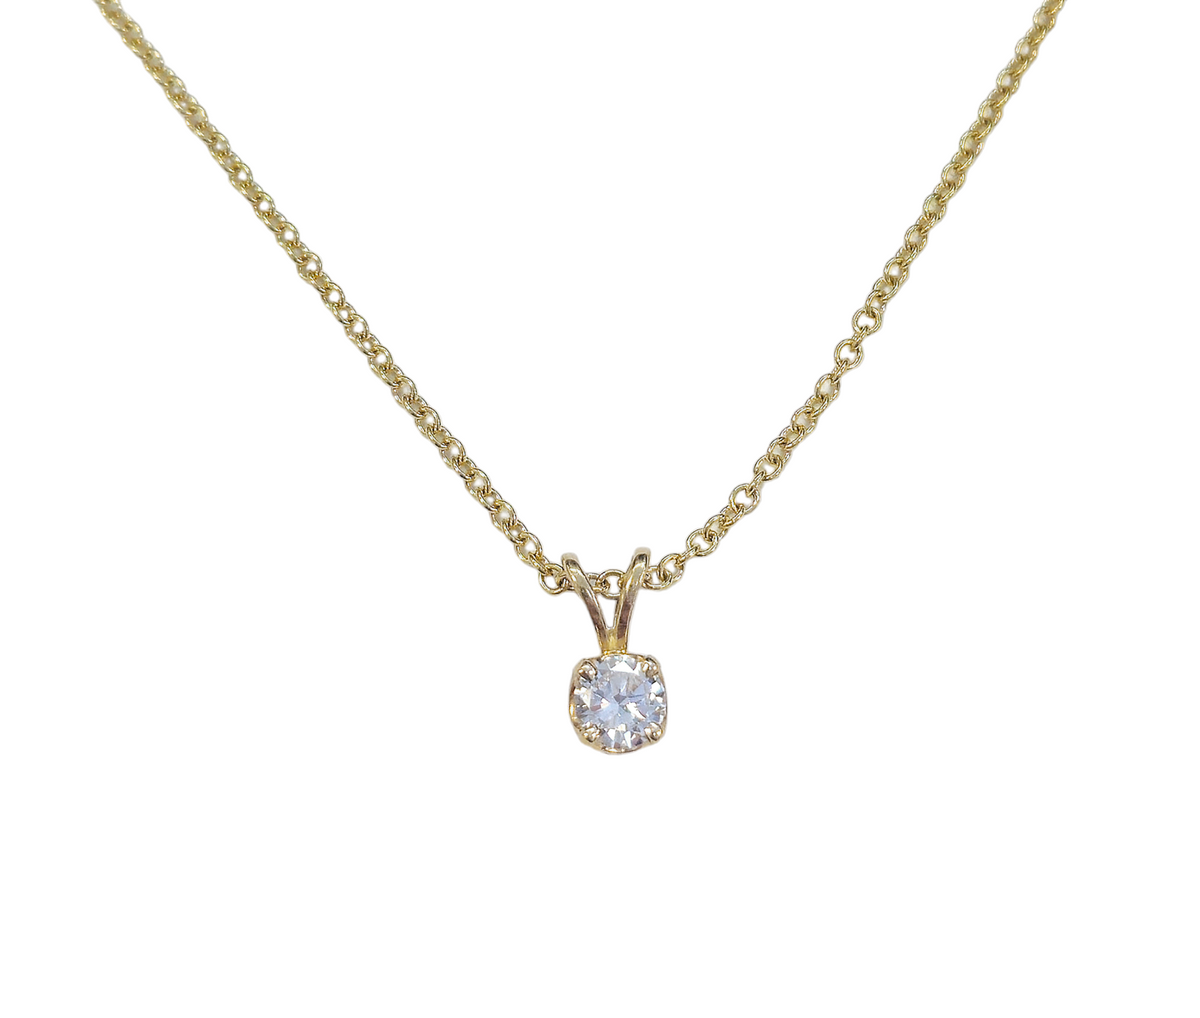 Natural Diamond solitaire pendant with chain made in solid 14-karat yellow gold